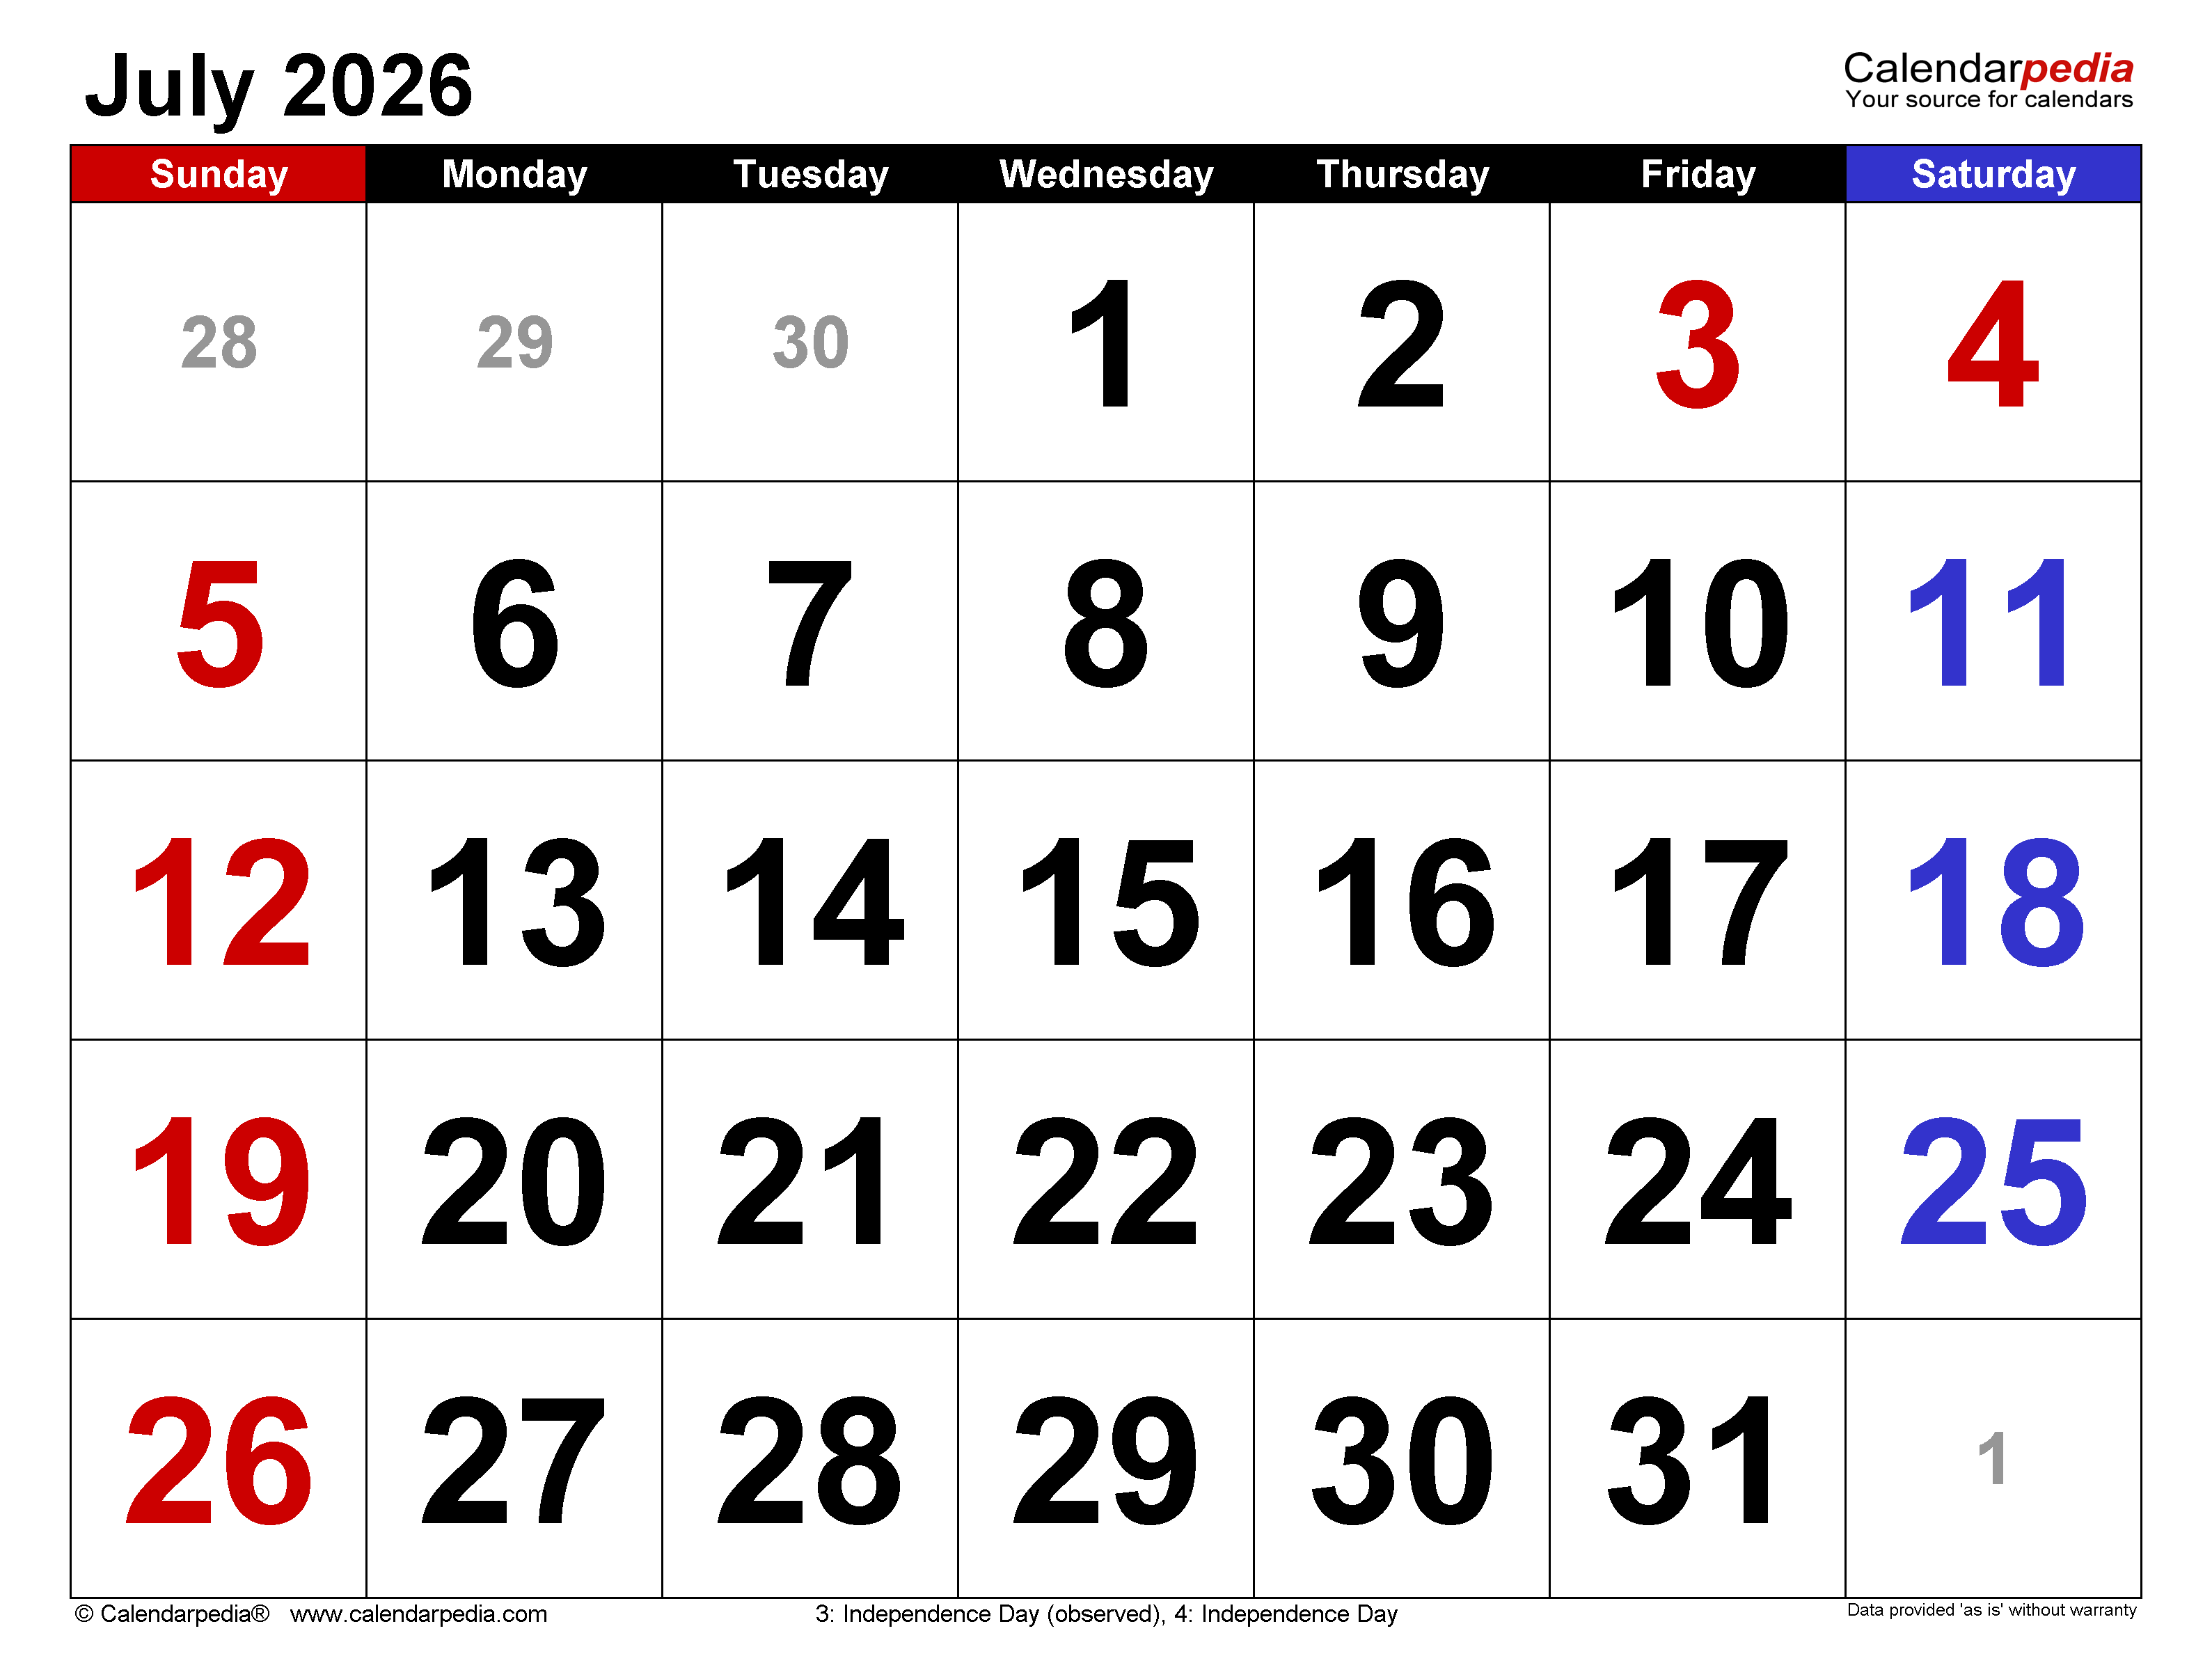 July 2026 Calendar | Templates For Word, Excel And Pdf pertaining to Calendar For July 2026